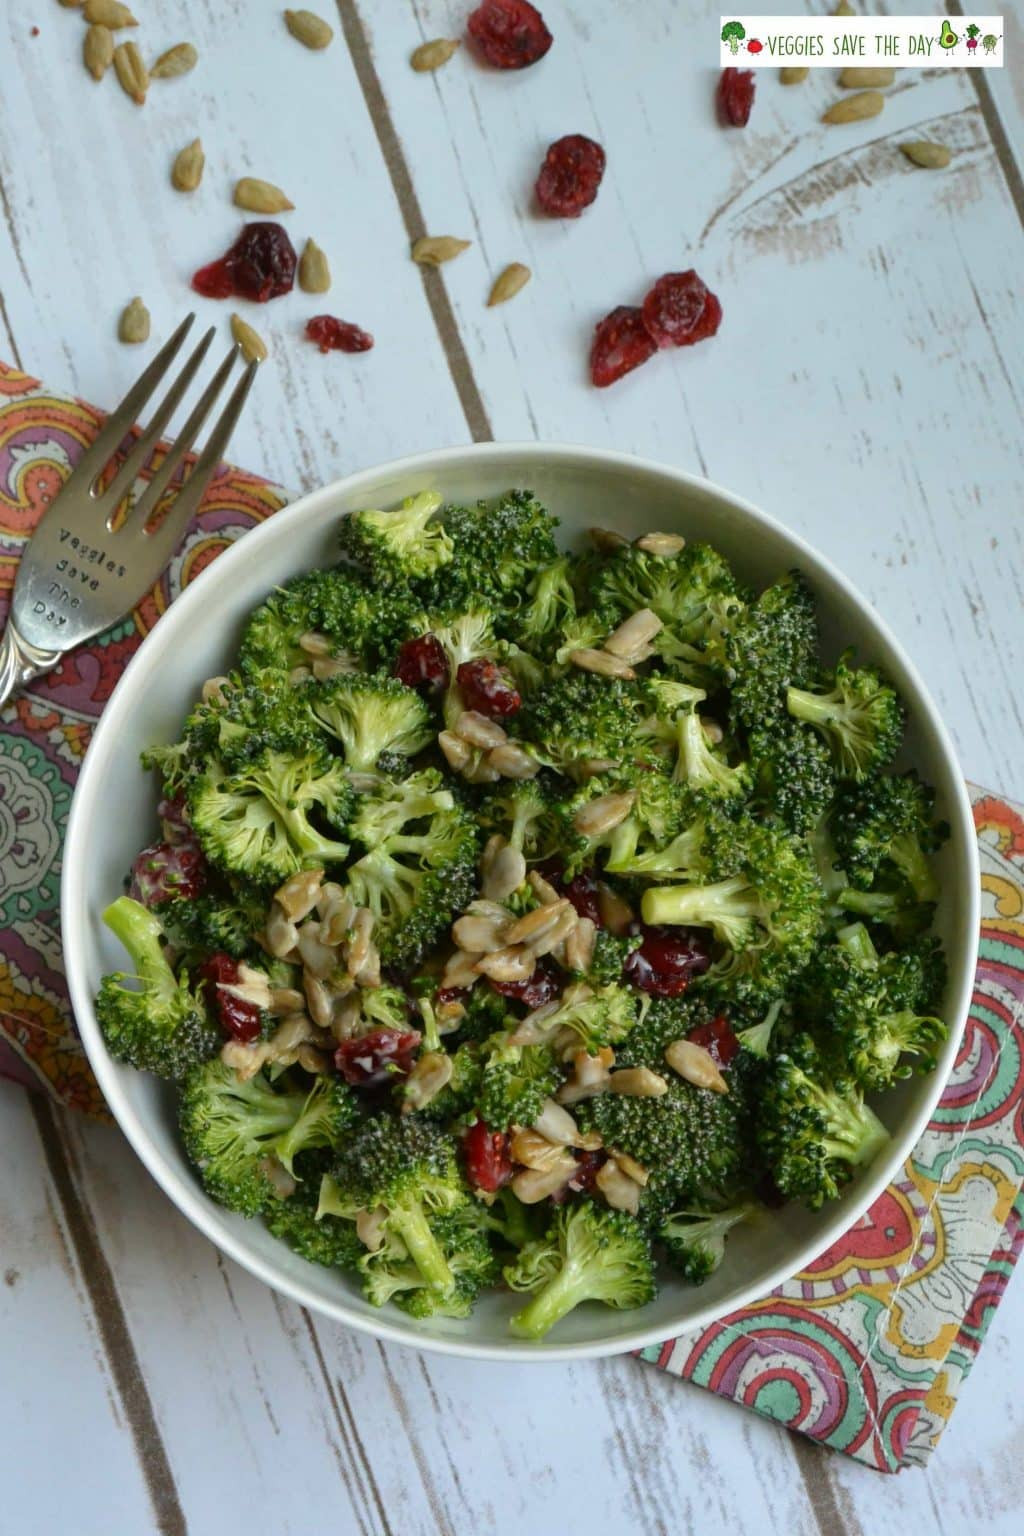 Broccoli Salads with Sunflower Seeds Lovely Broccoli Salad with Sunflower Seeds and Cranberries